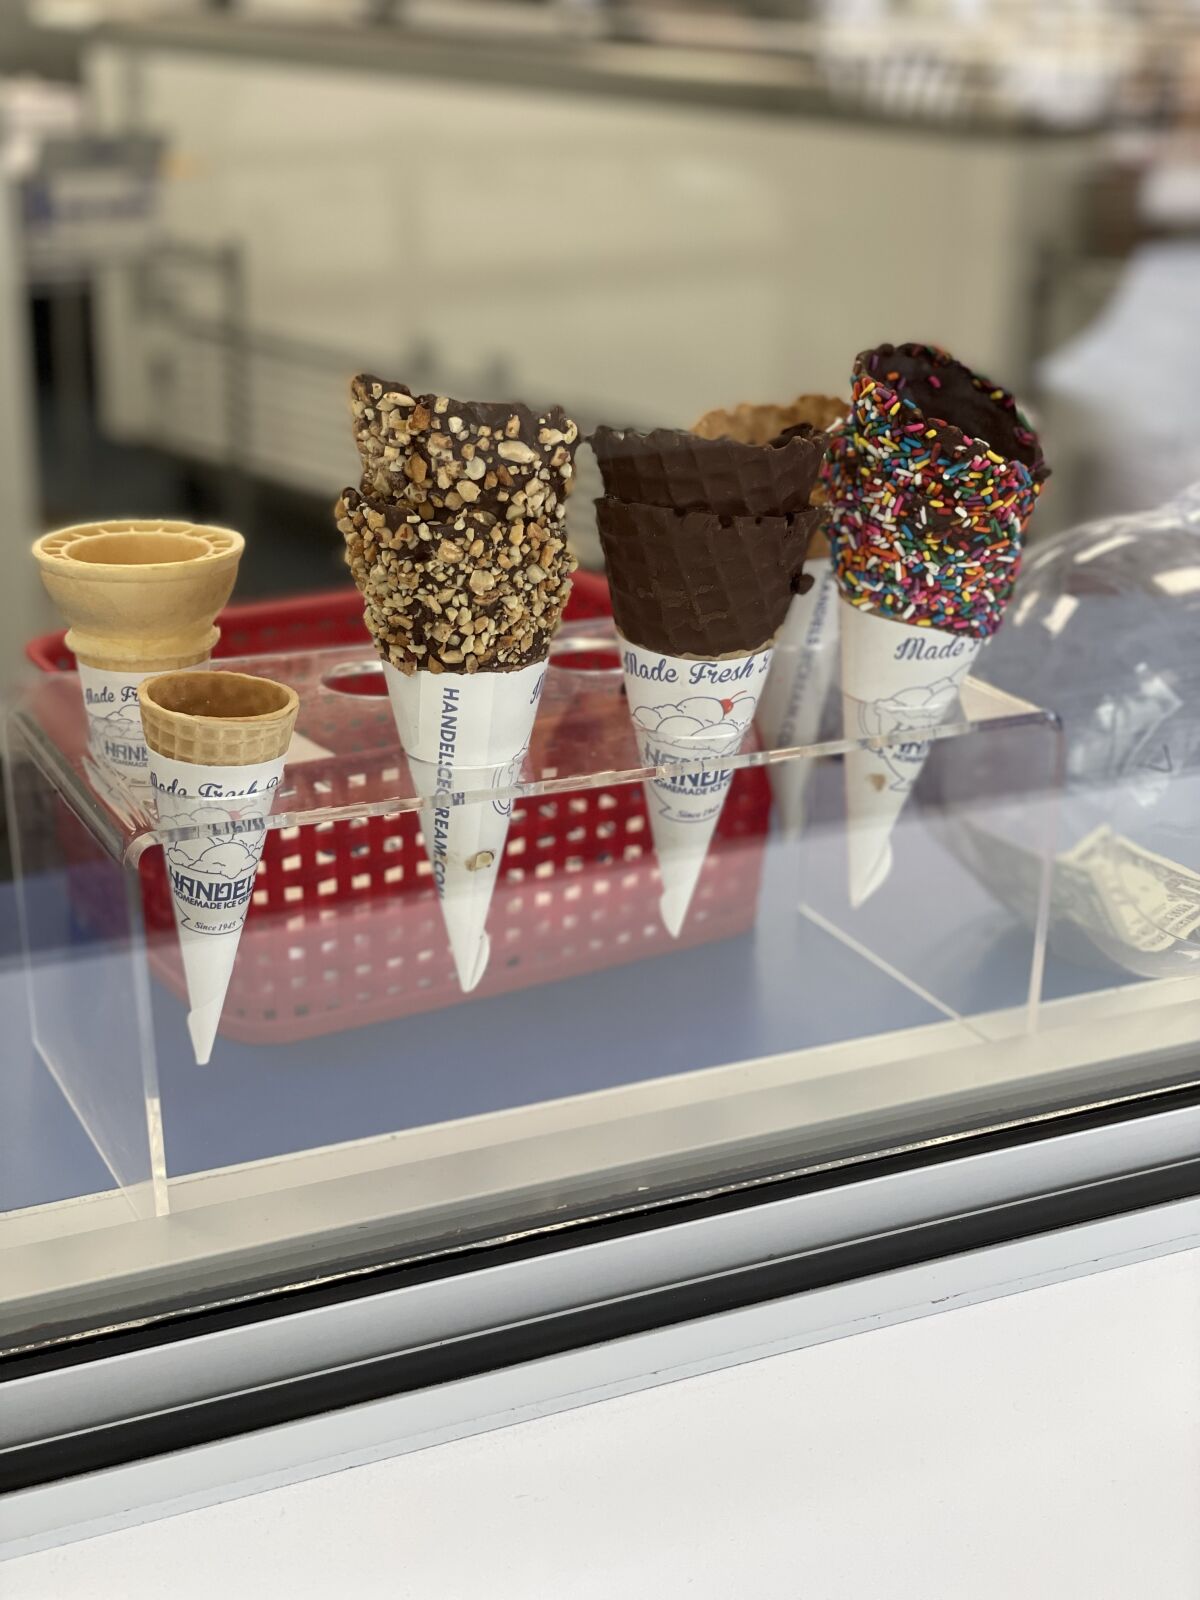 A variety of cones from Handel's.